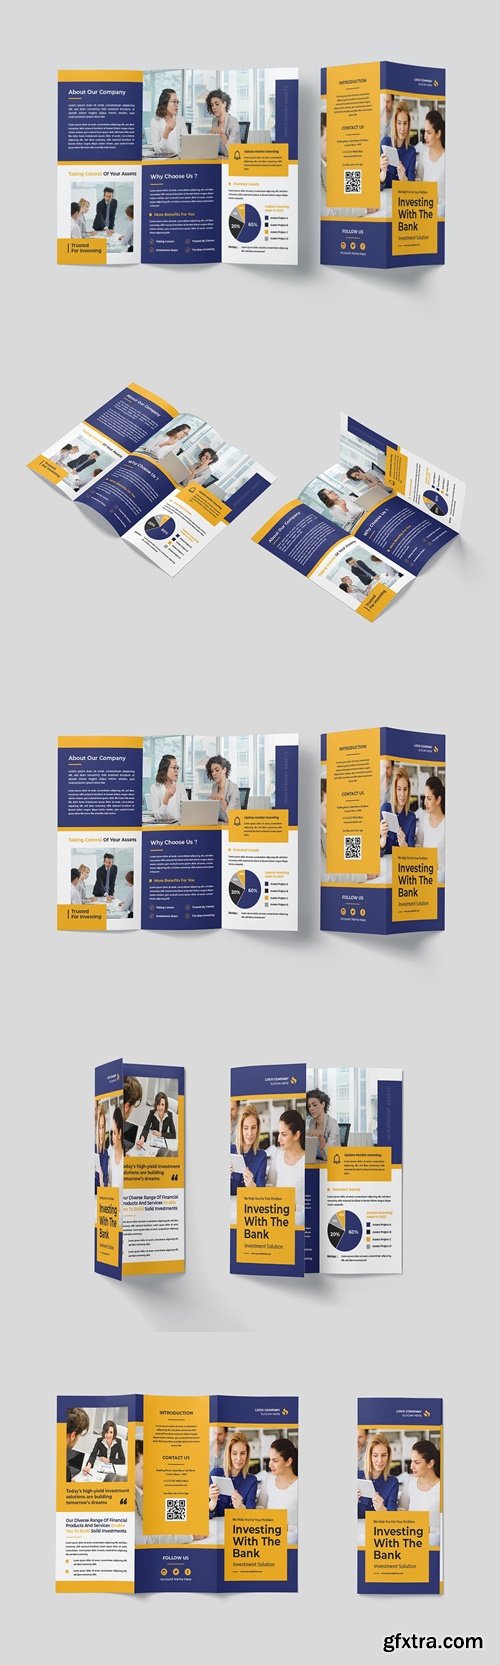 Investment Assets Trifold Brochure